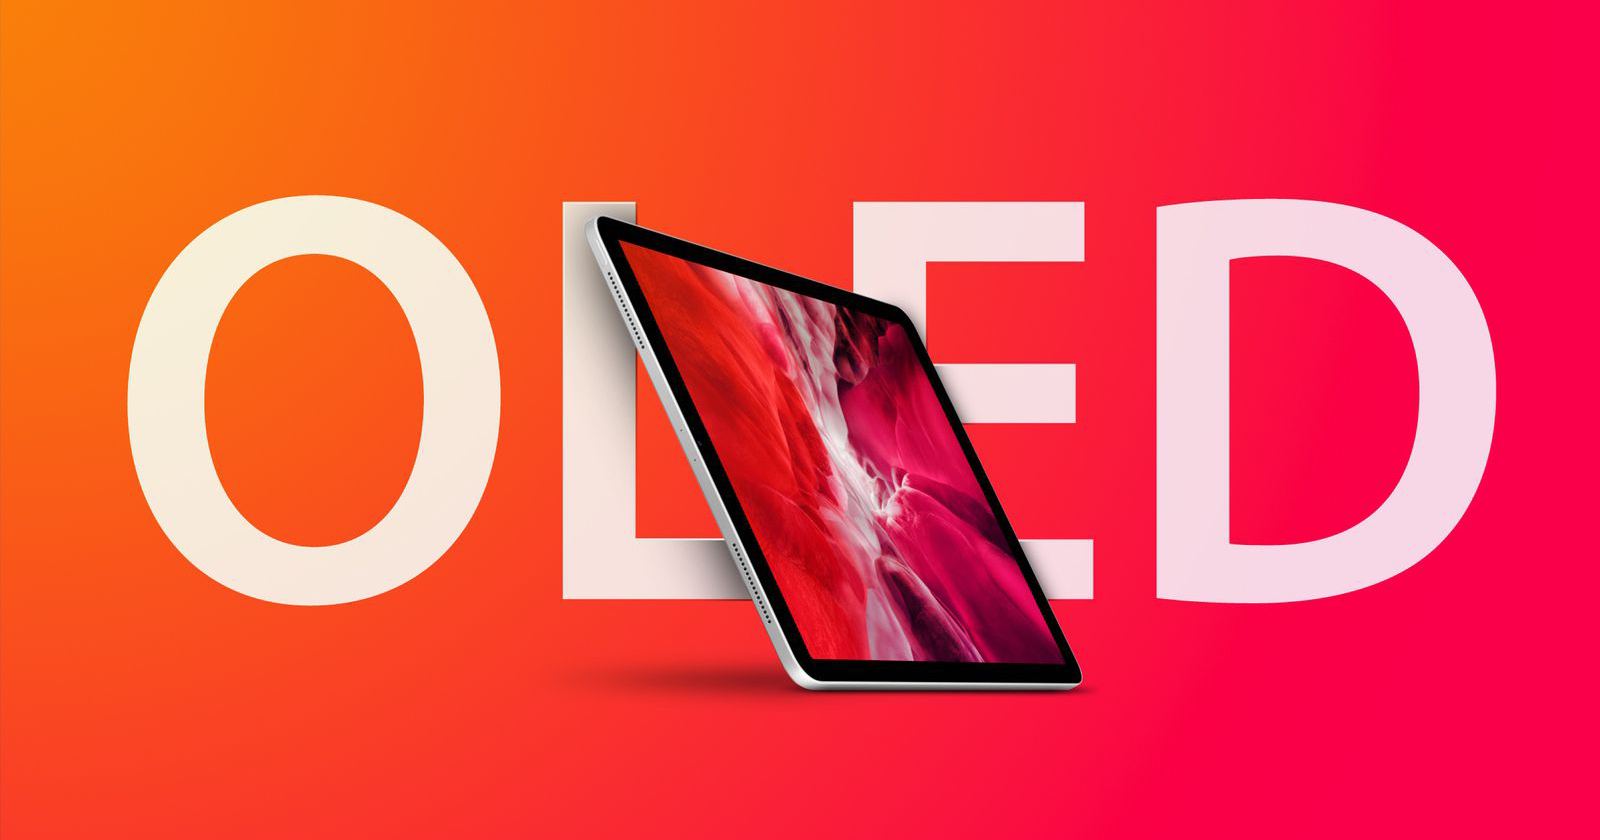 Critical development for iPad Pro with OLED screen!